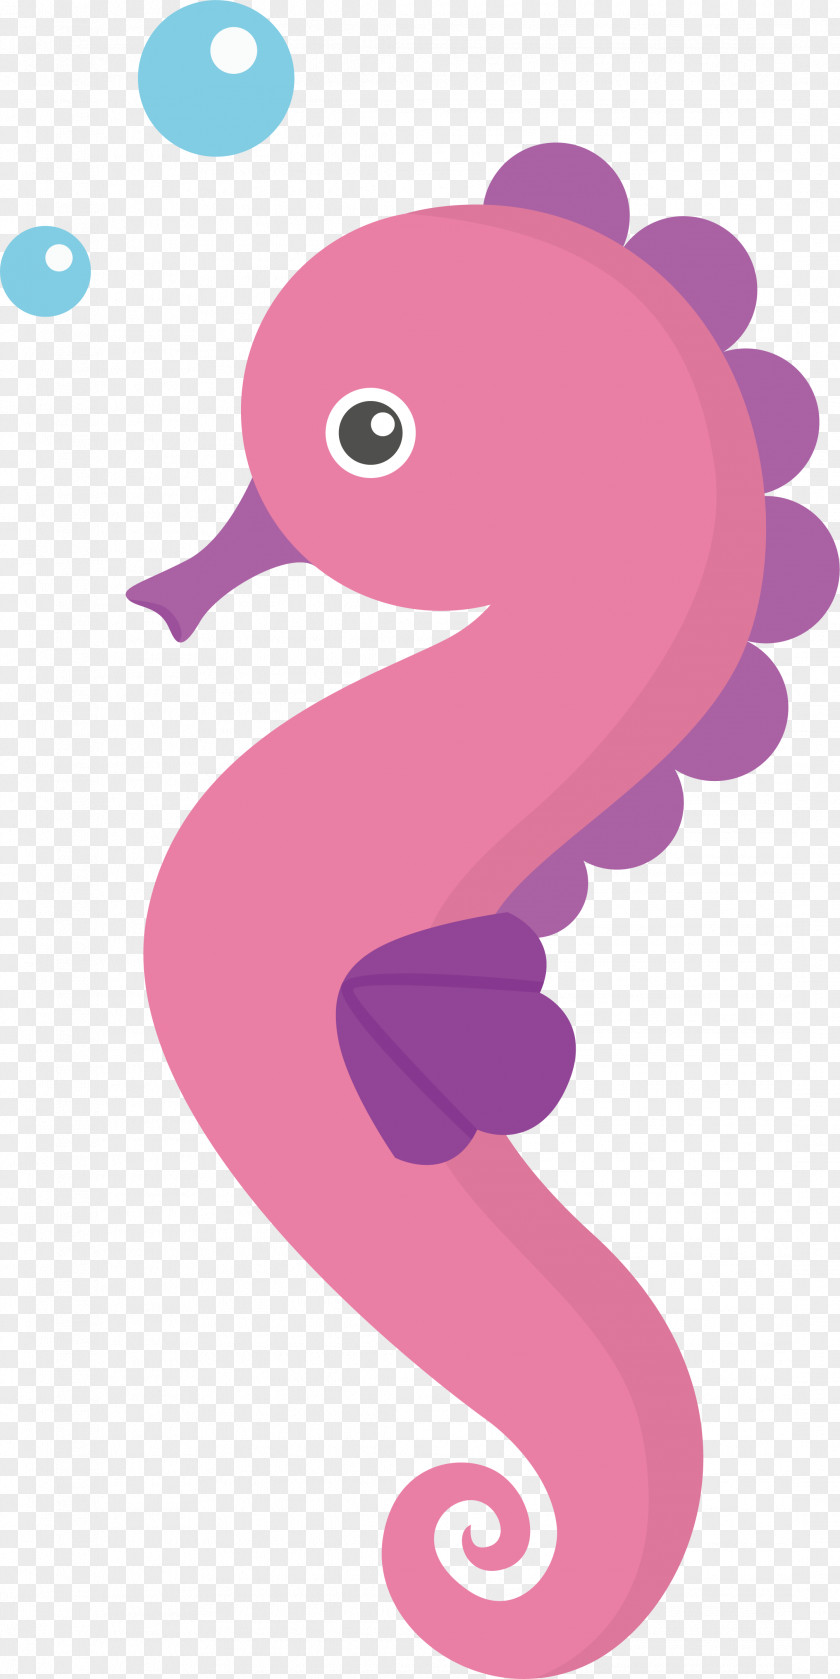 Spit Bubbles In The Hippocampus Seahorse Cartoon Animation Clip Art PNG